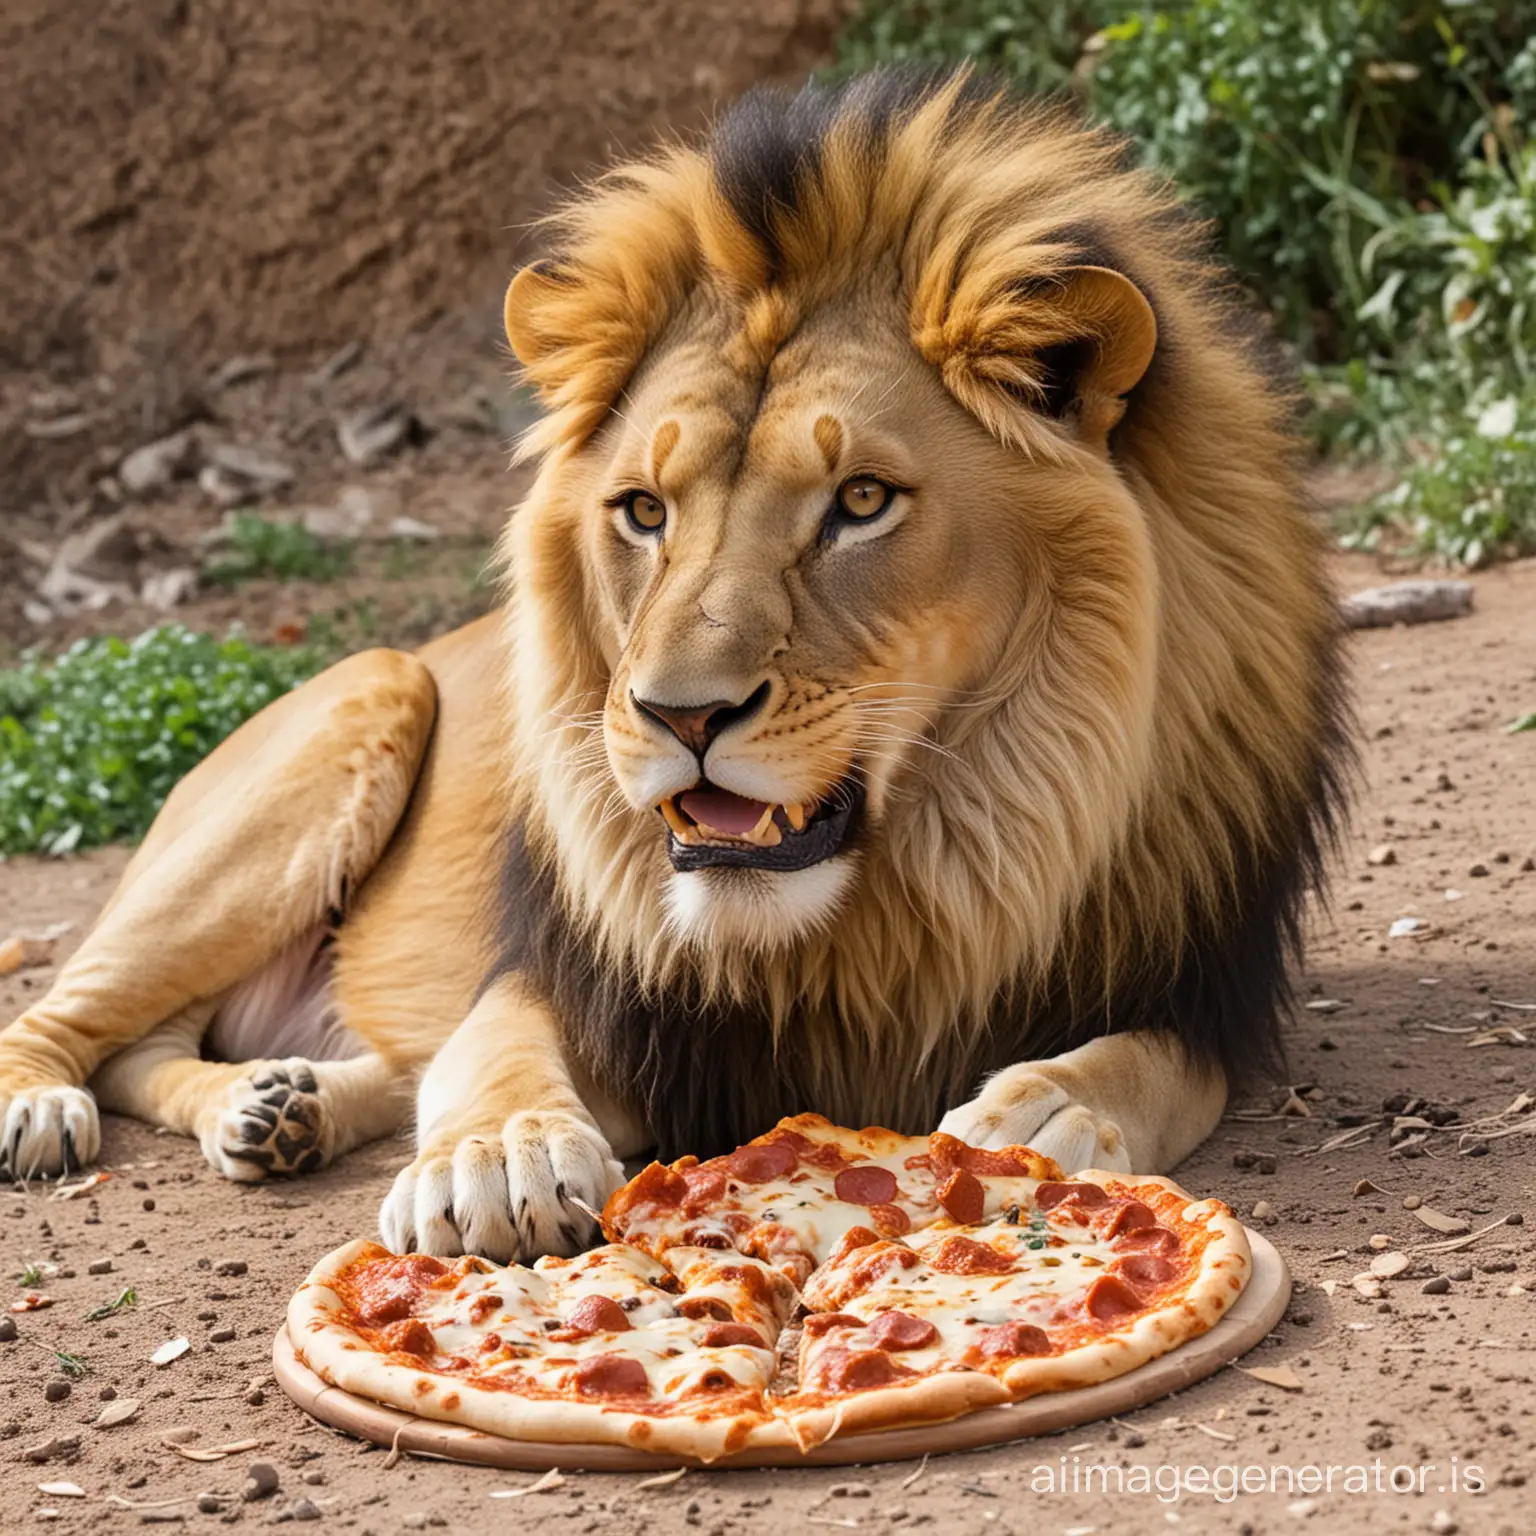 Lion-Savoring-Pizza-in-a-Comical-Jungle-Caf